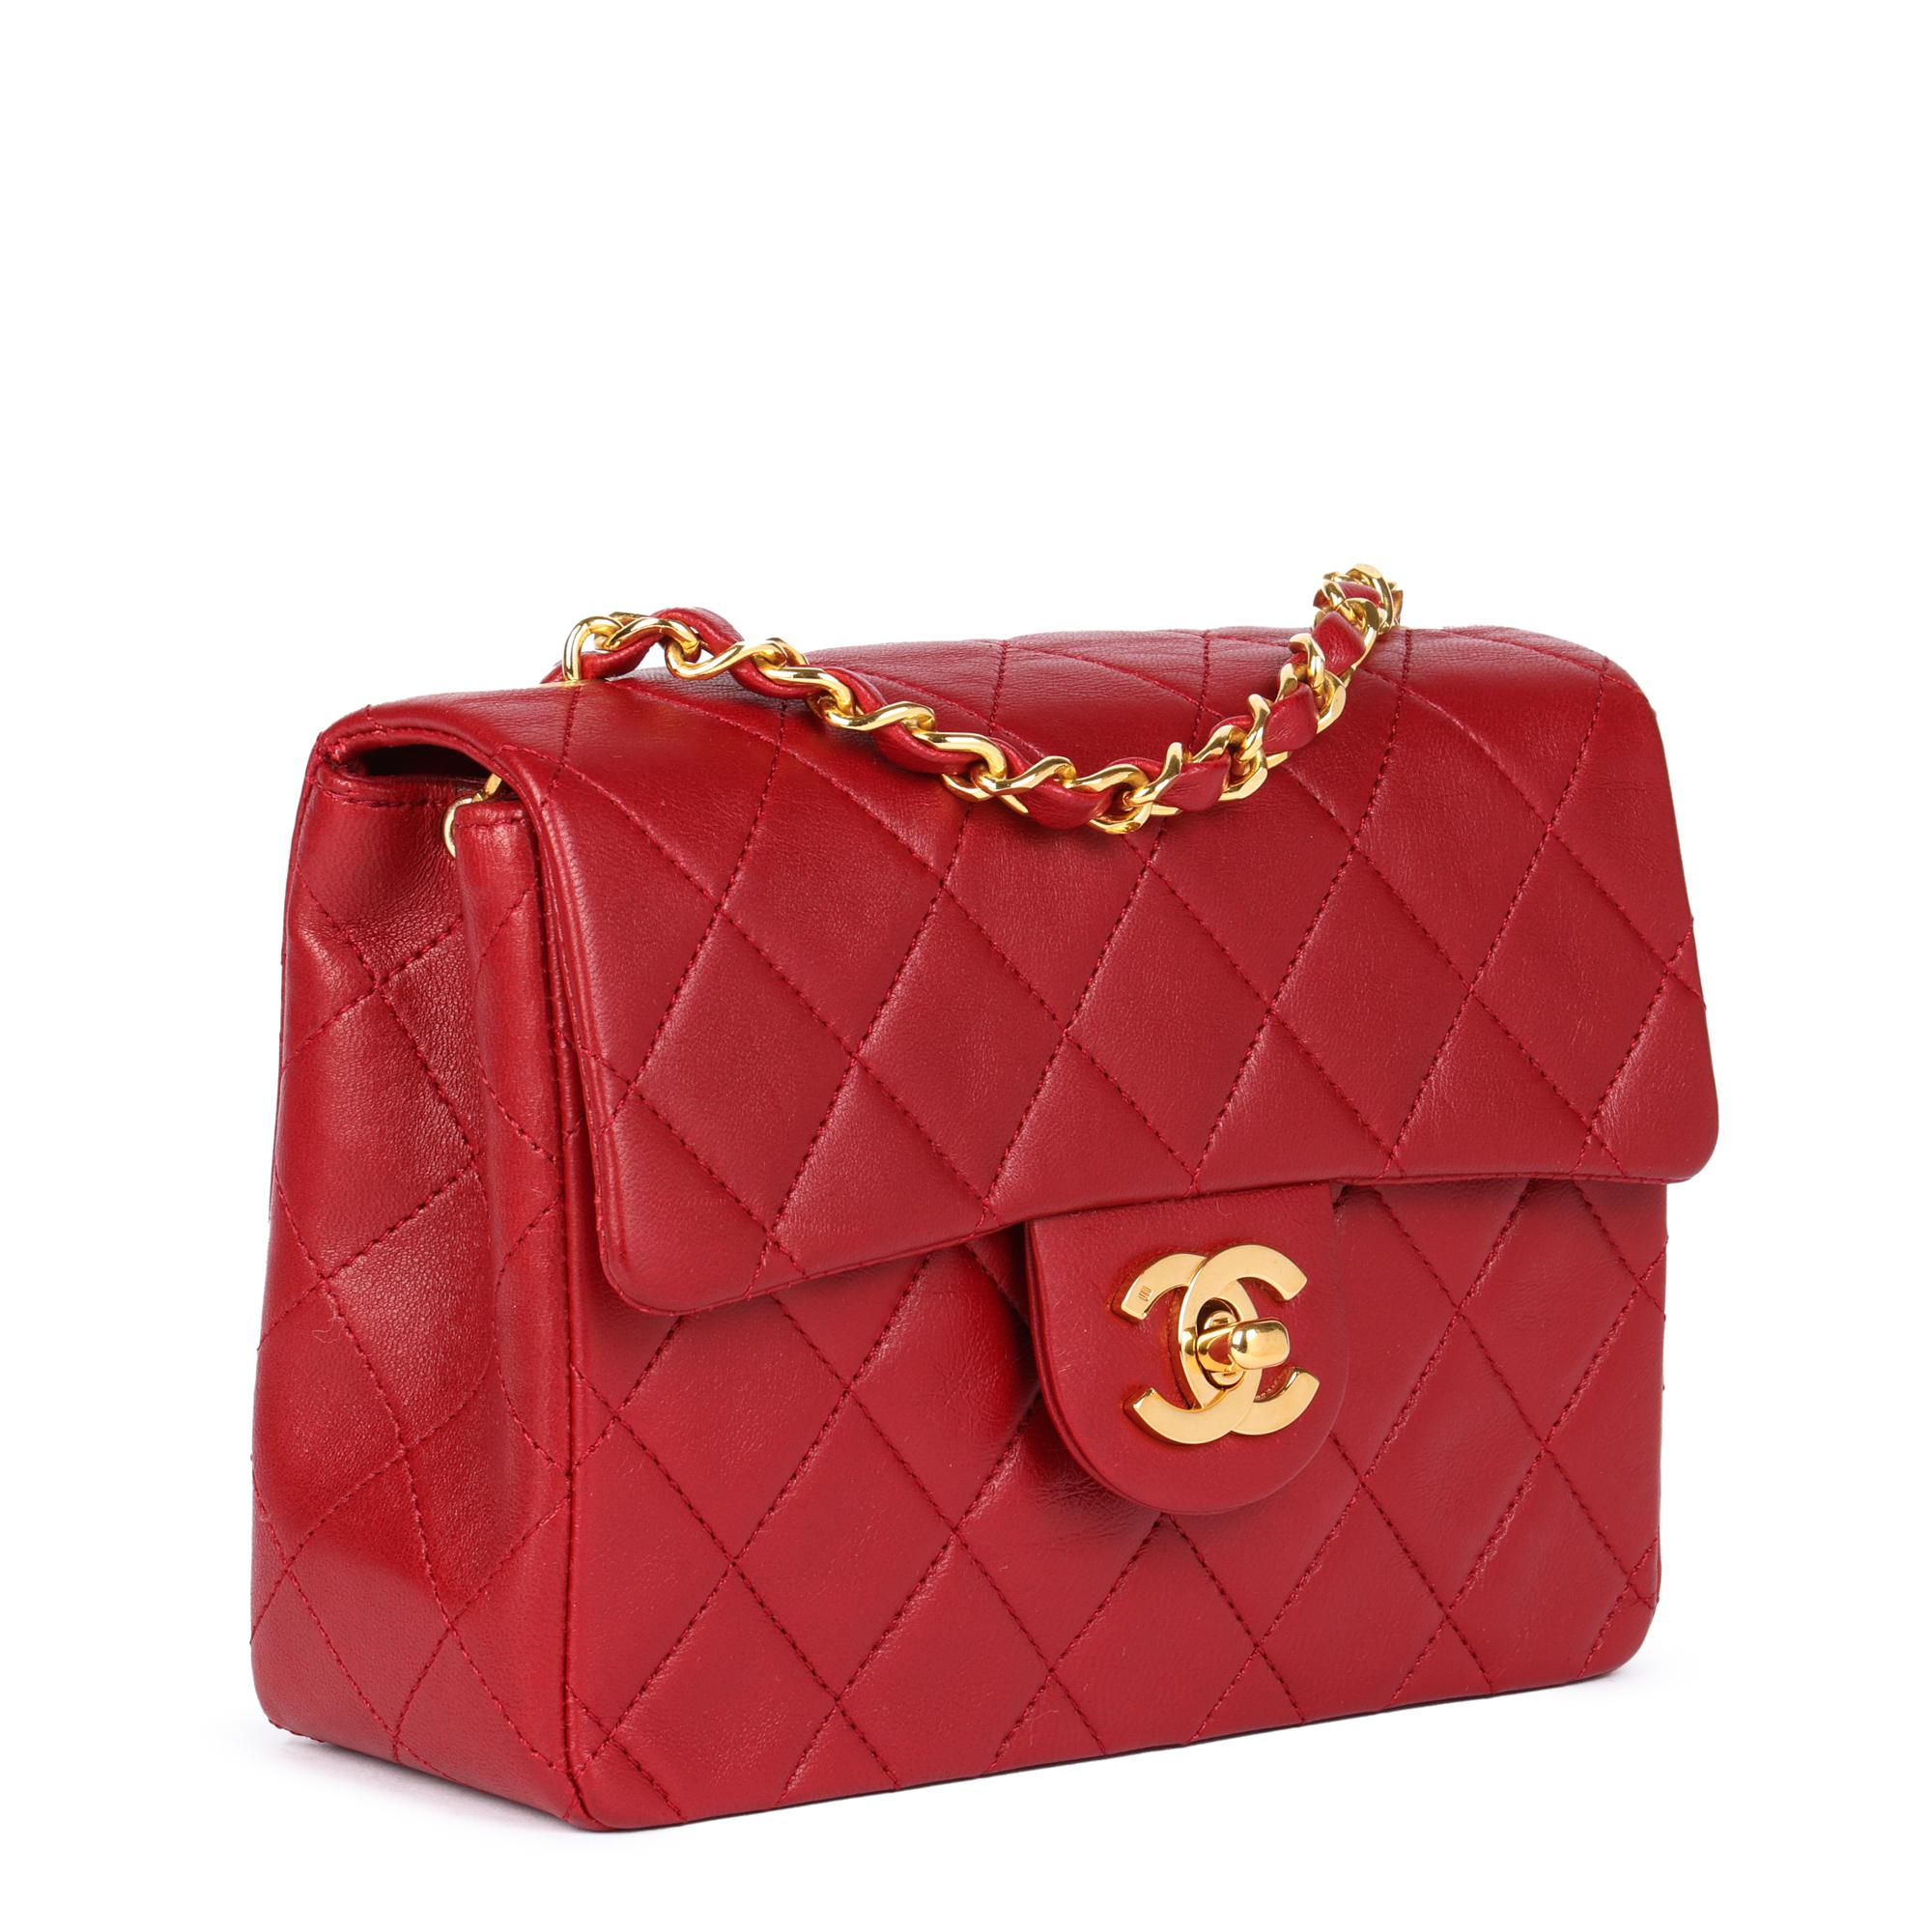 CHANEL
Red Quilted Lambskin Vintage Square Mini Flap Bag

Xupes Reference: HB4880
Serial Number: 1044361
Age (Circa): 1989
Accompanied By: Chanel Dust Bag, Authenticity Card (numbers have lost colour but can still be read)
Authenticity Details: